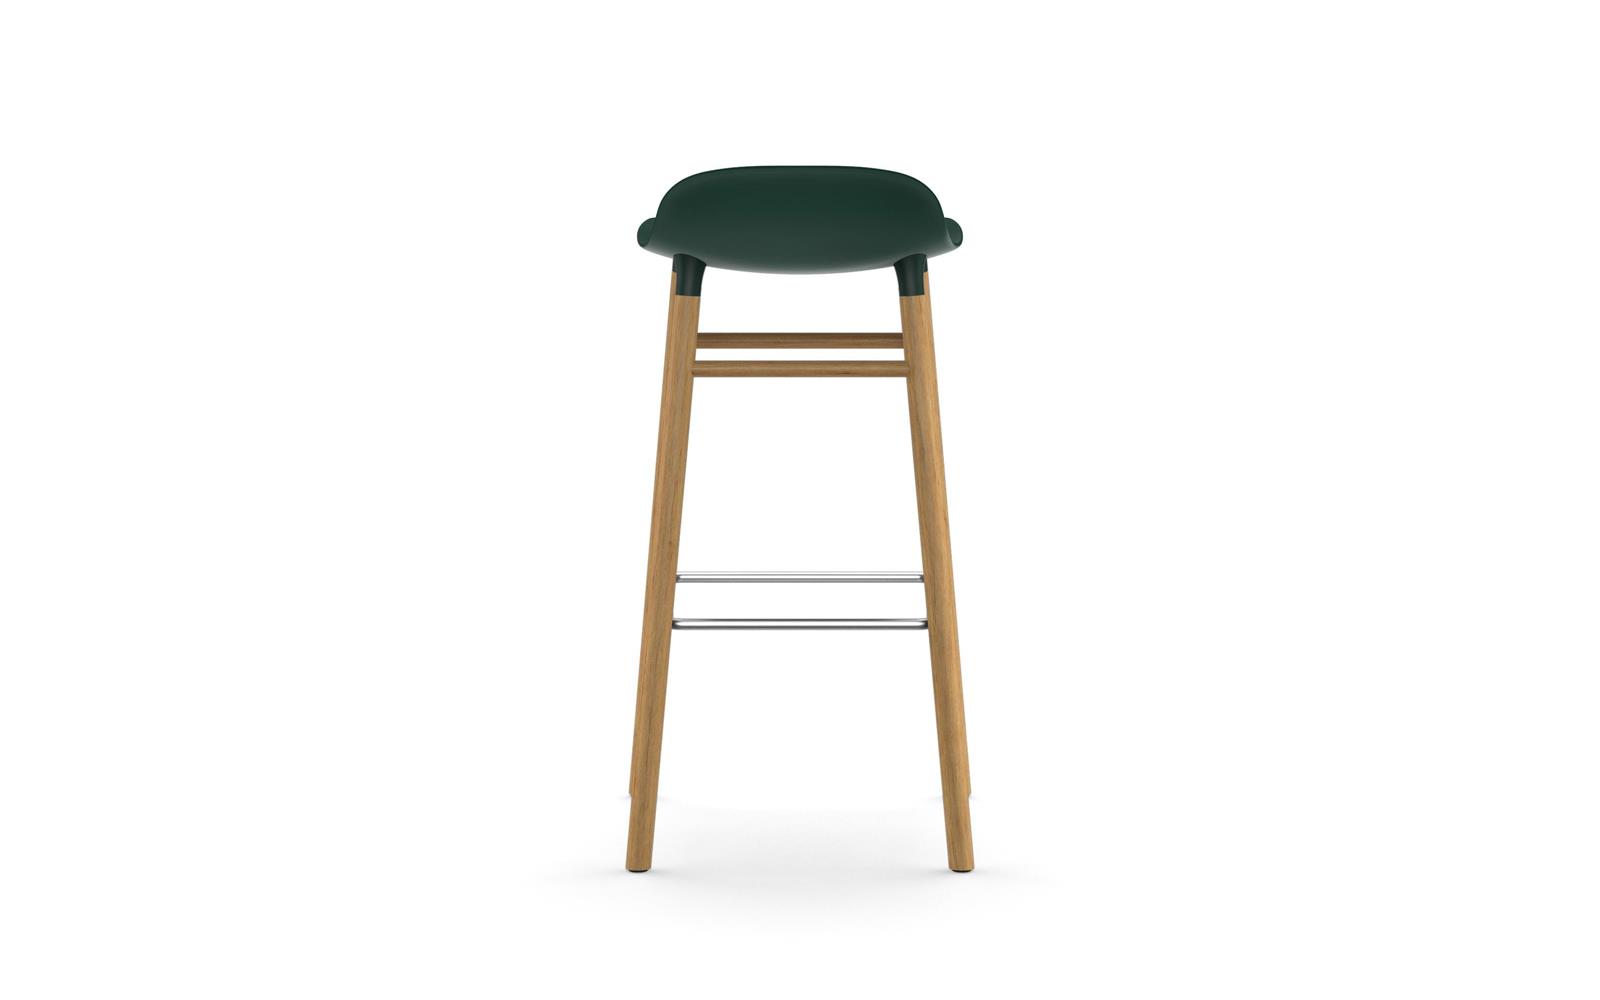 Molded Plastic S Chair With Oak Legs, Molded Plastic Bar Stools